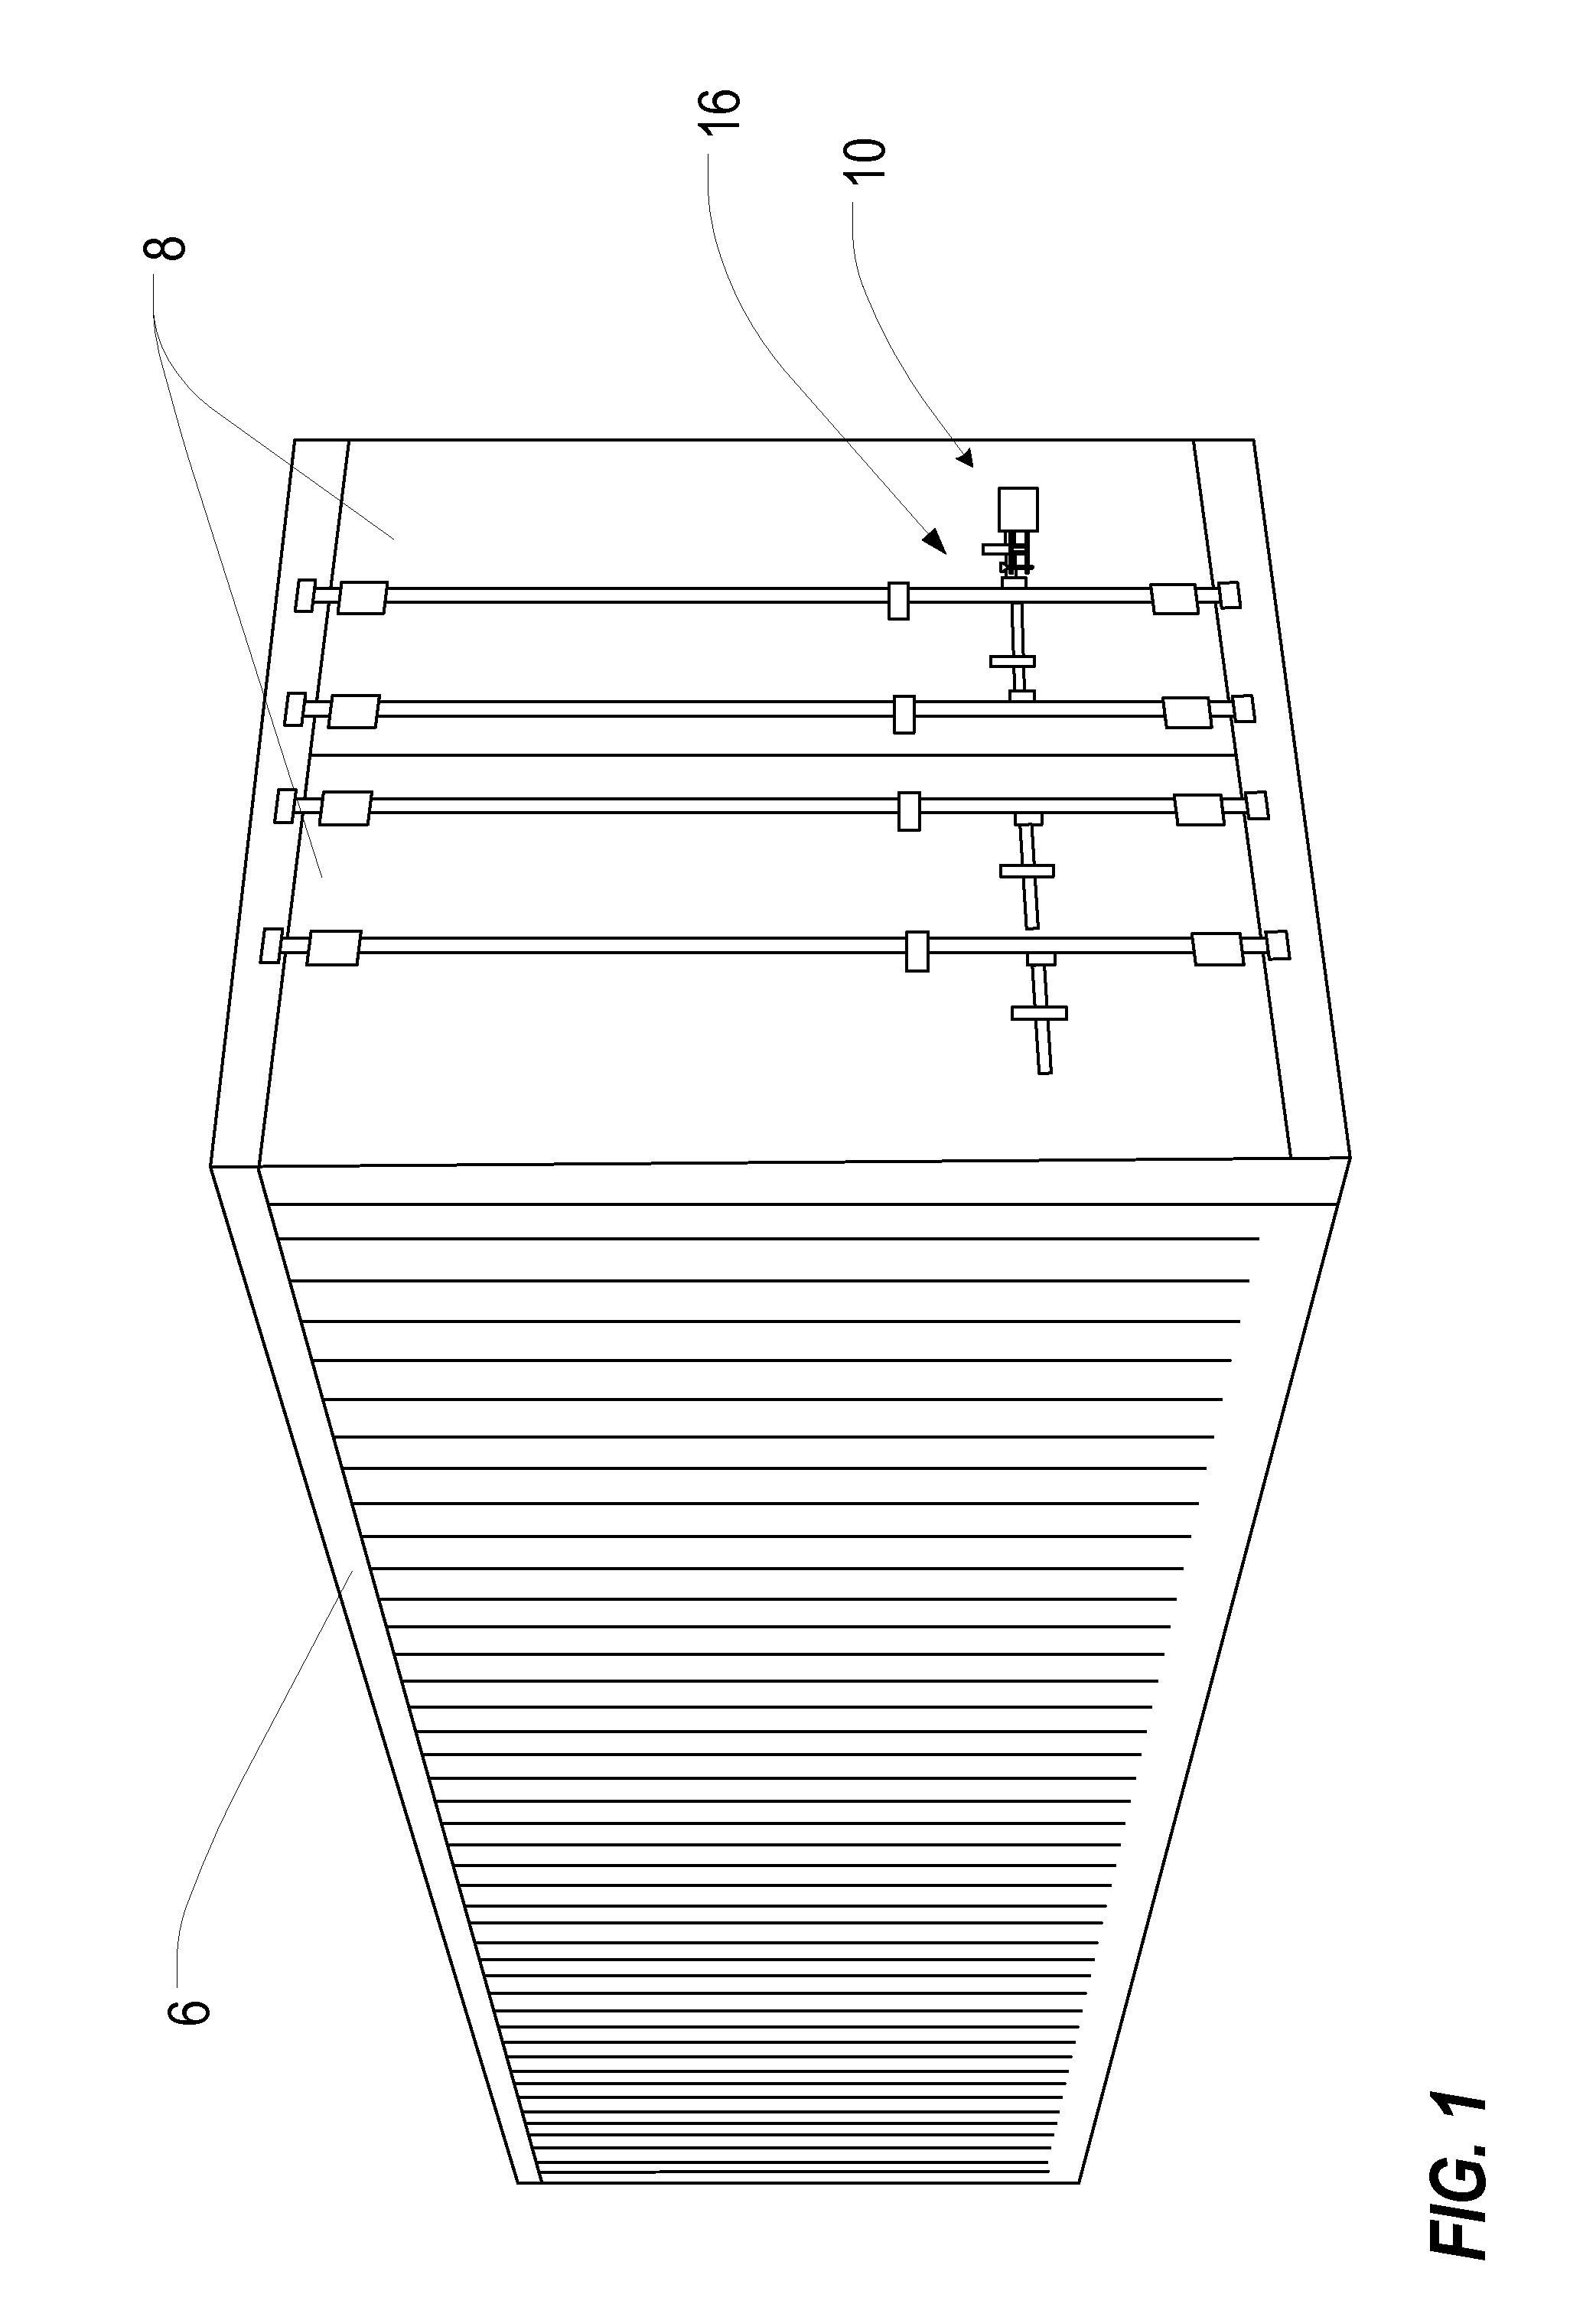 Locking system for shipping container including bolt seal and electronic device with arms for receiving bolt seal